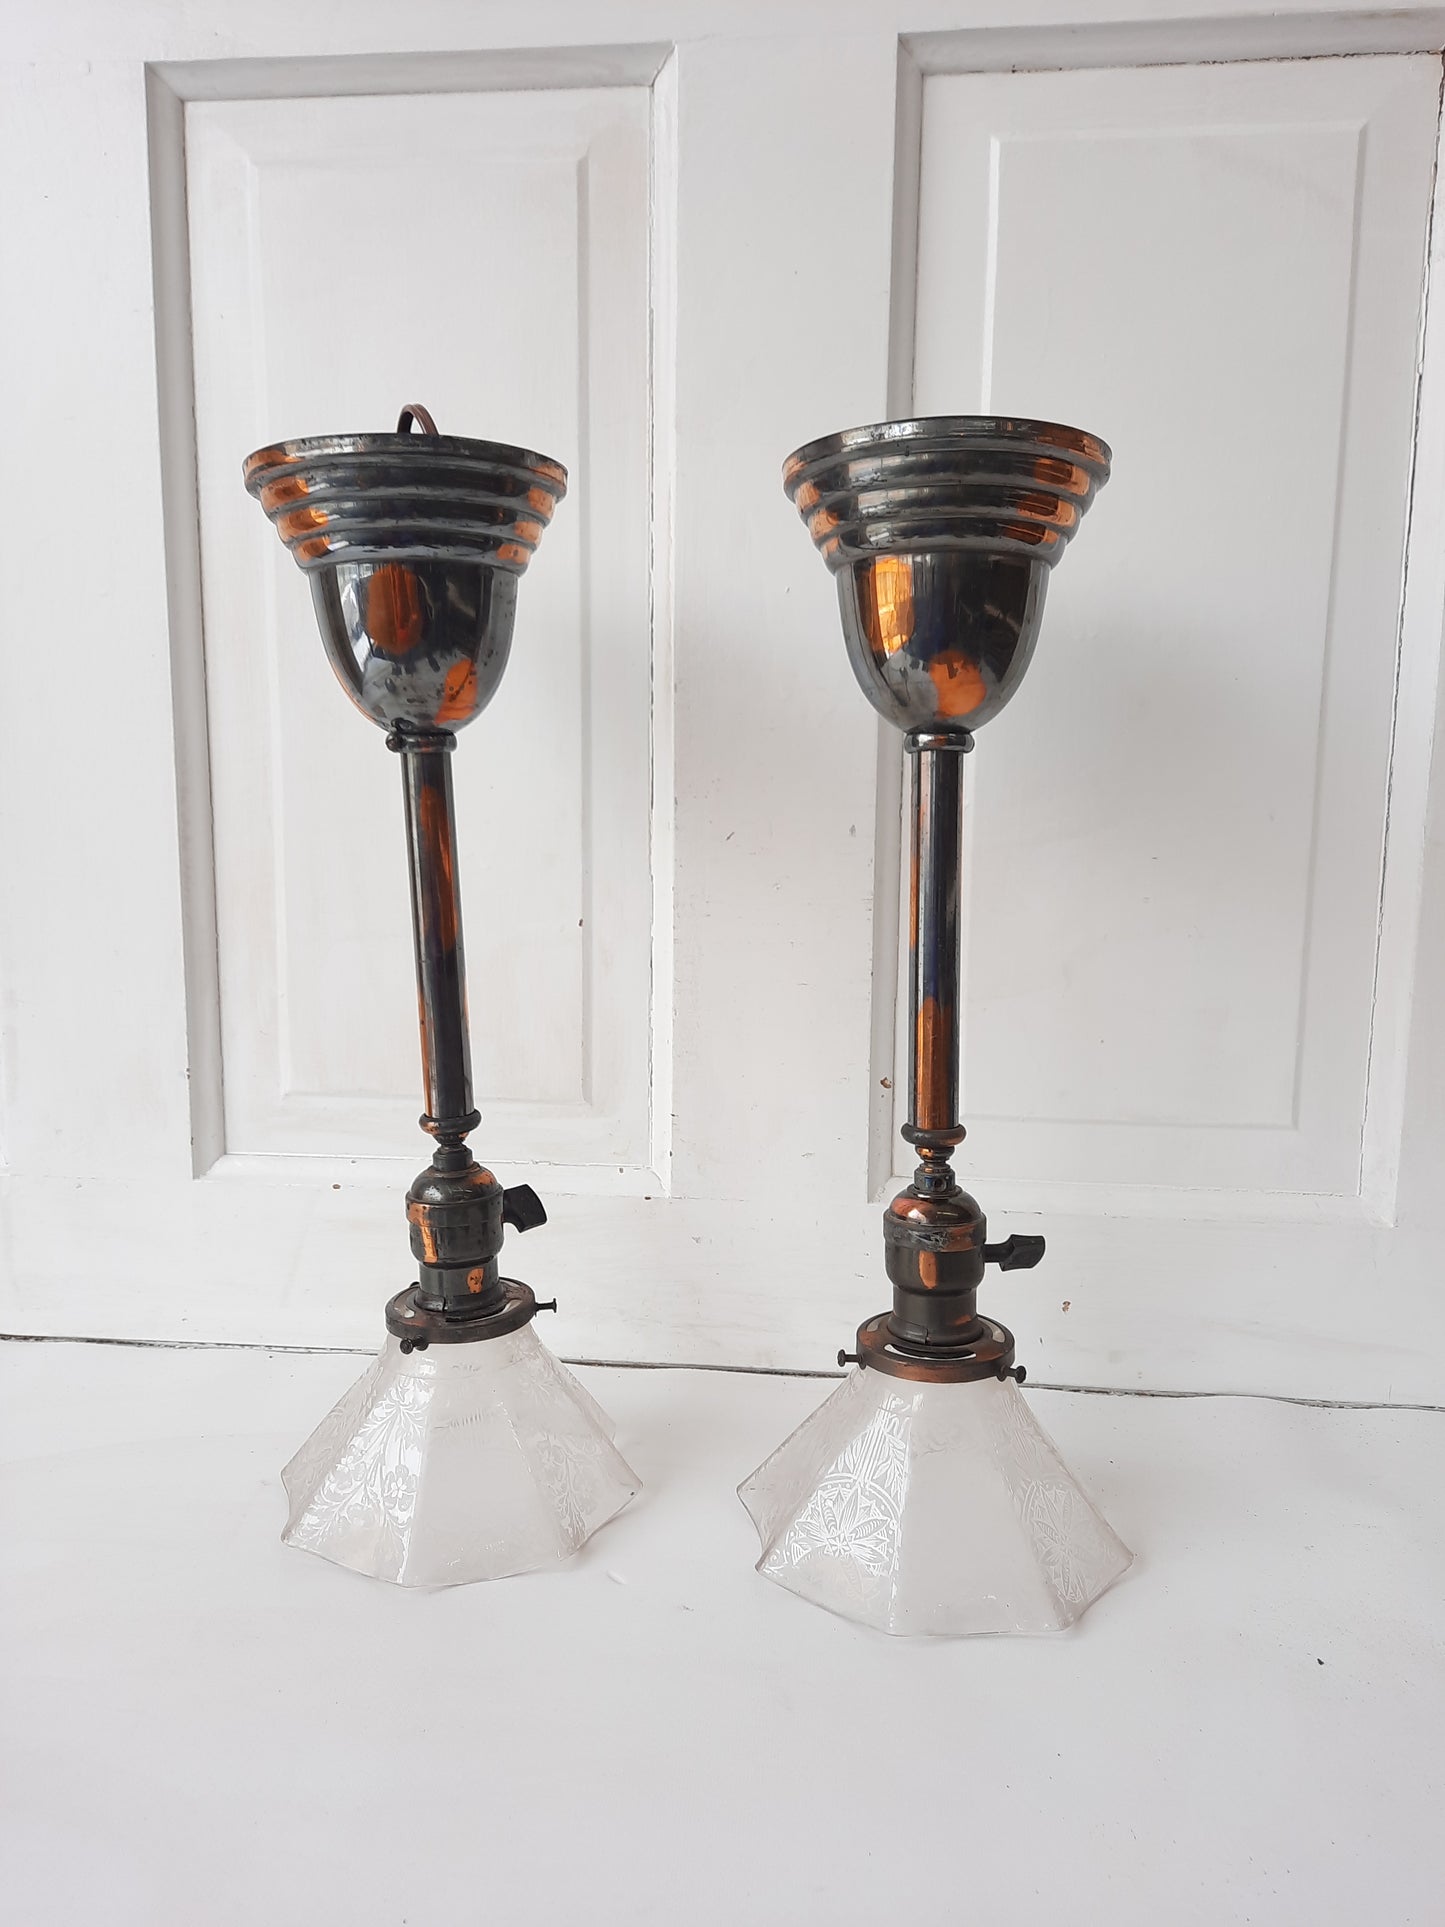 Two Art Nouveau Antique Lights with Fluted Glass Shade, Japanned Brass Vintage Pendant Lights 011703